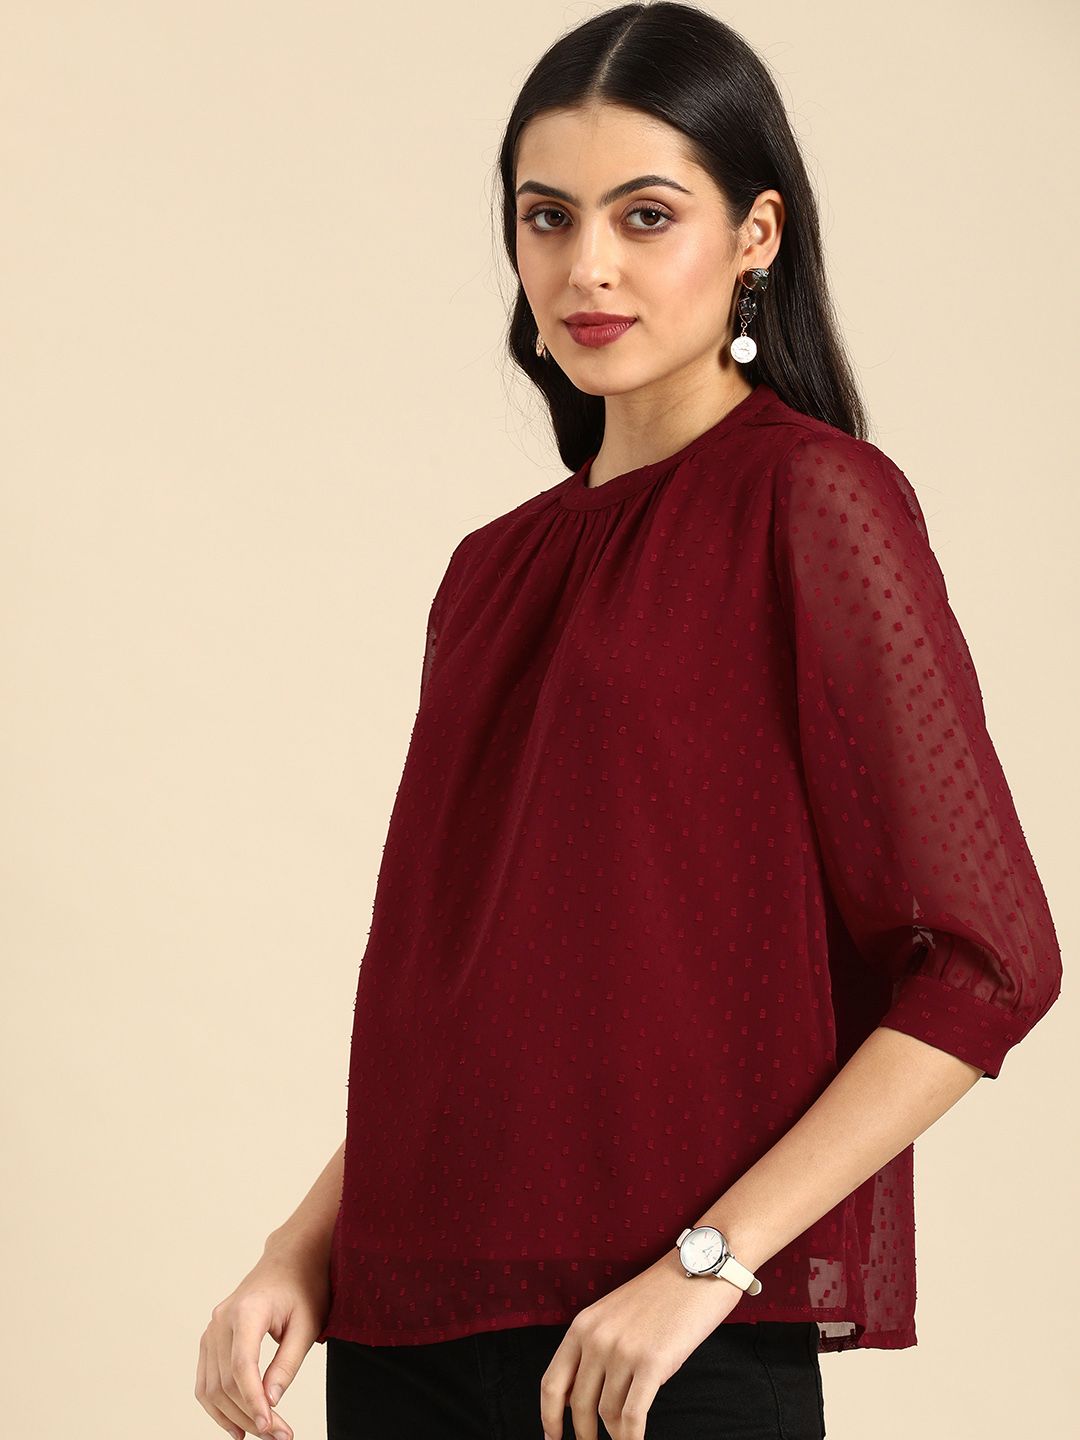 all about you Women Maroon Self Designed Dobby Regular Top Price in India